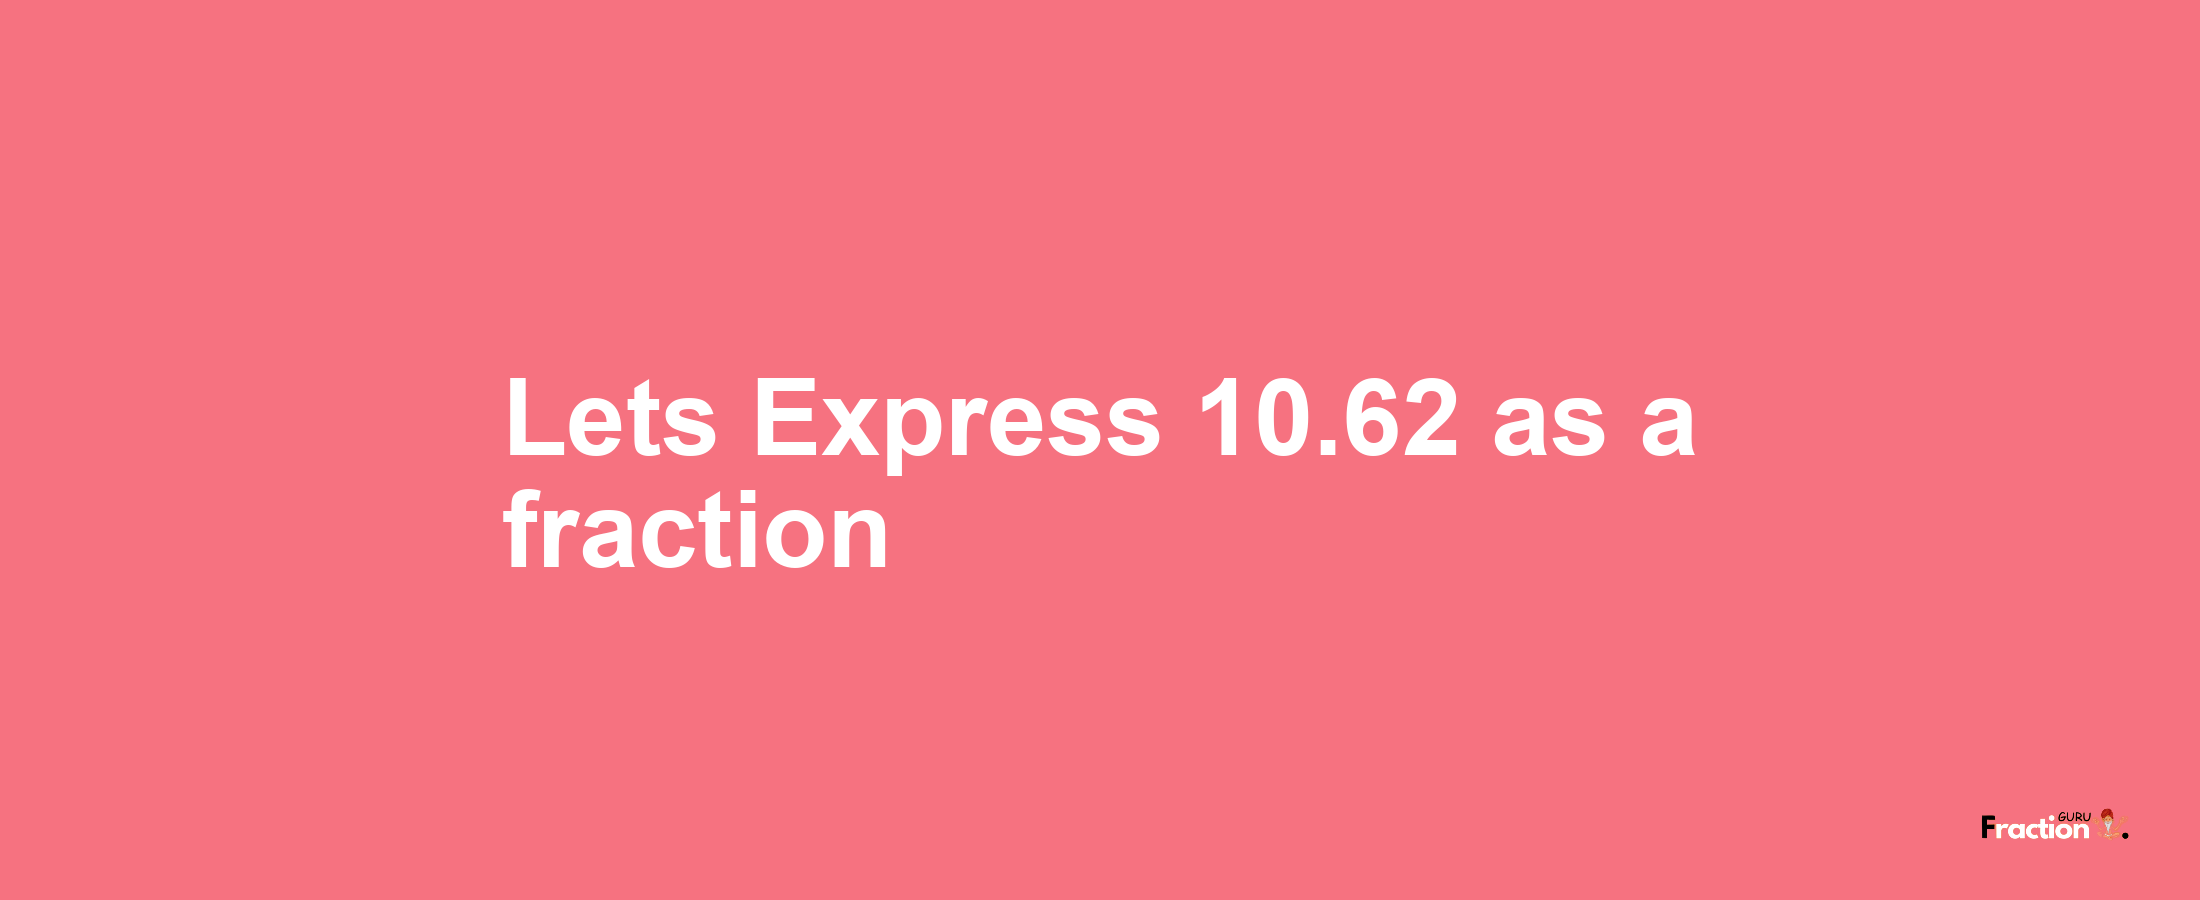 Lets Express 10.62 as afraction